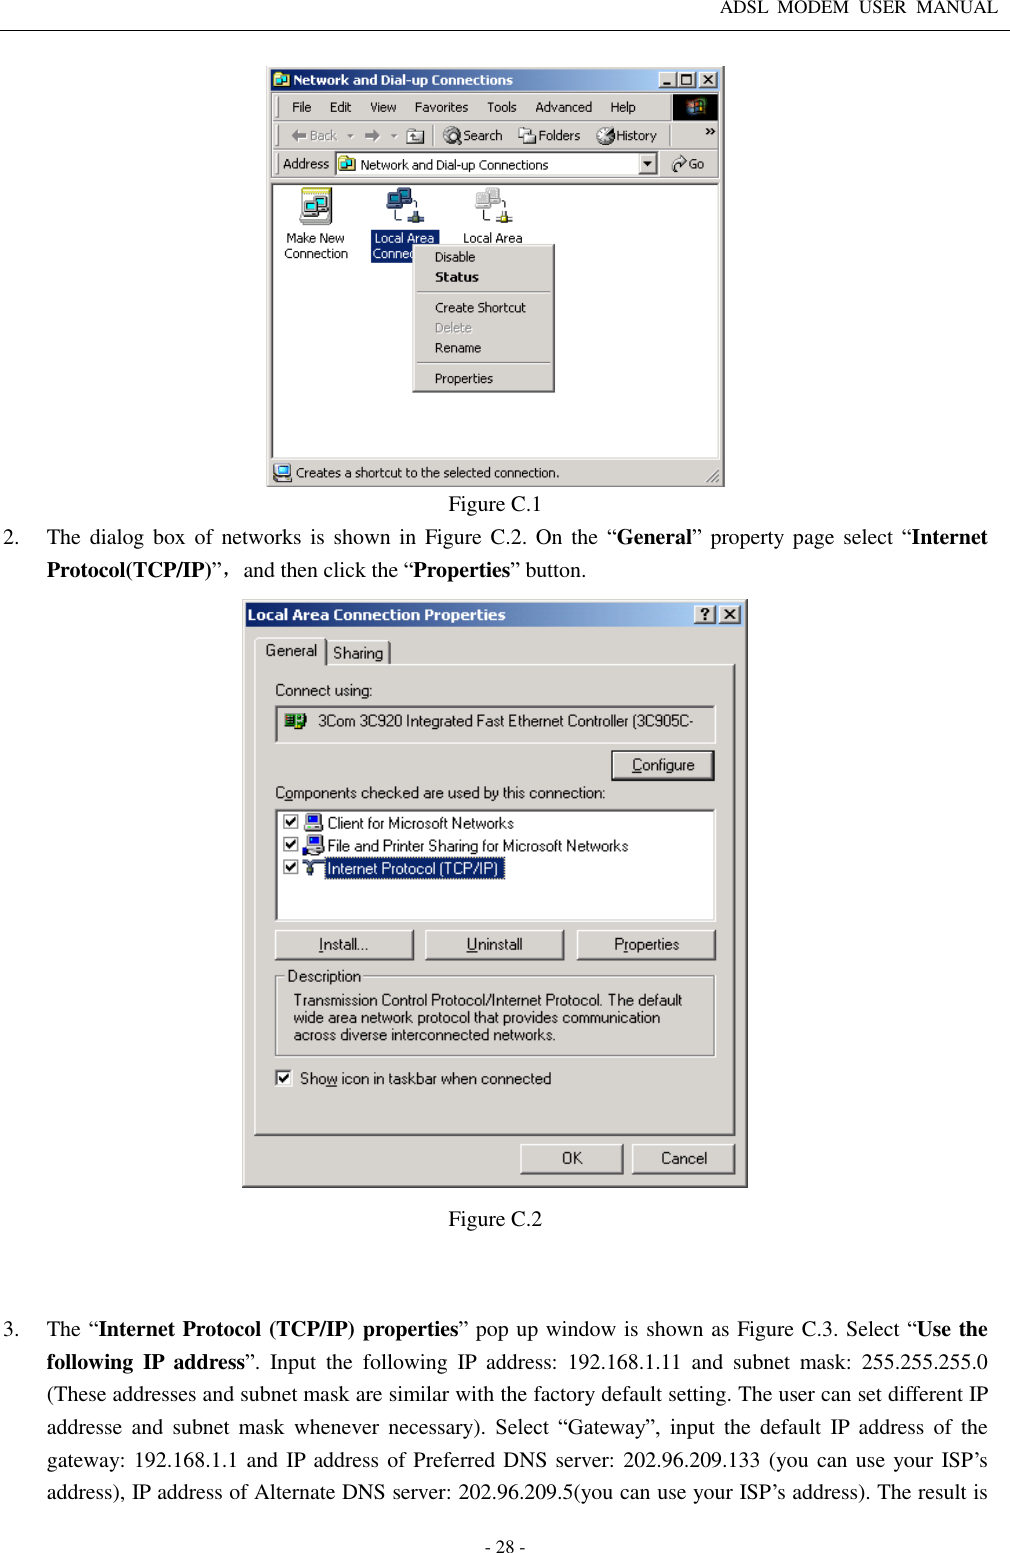 ADSL  MODEM  USER  MANUAL   - 28 -  Figure C.1 2. The dialog box of  networks is shown  in  Figure  C.2. On the  “General” property page select “Internet Protocol(TCP/IP)”，and then click the “Properties” button.  Figure C.2   3. The “Internet Protocol (TCP/IP) properties” pop up window is shown as Figure C.3. Select “Use the following  IP  address”.  Input  the  following  IP  address:  192.168.1.11  and  subnet  mask:  255.255.255.0 (These addresses and subnet mask are similar with the factory default setting. The user can set different IP addresse  and  subnet  mask  whenever  necessary).  Select  “Gateway”,  input  the  default  IP  address of  the gateway: 192.168.1.1 and IP address of Preferred DNS server: 202.96.209.133 (you can use your ISP’s address), IP address of Alternate DNS server: 202.96.209.5(you can use your ISP’s address). The result is 